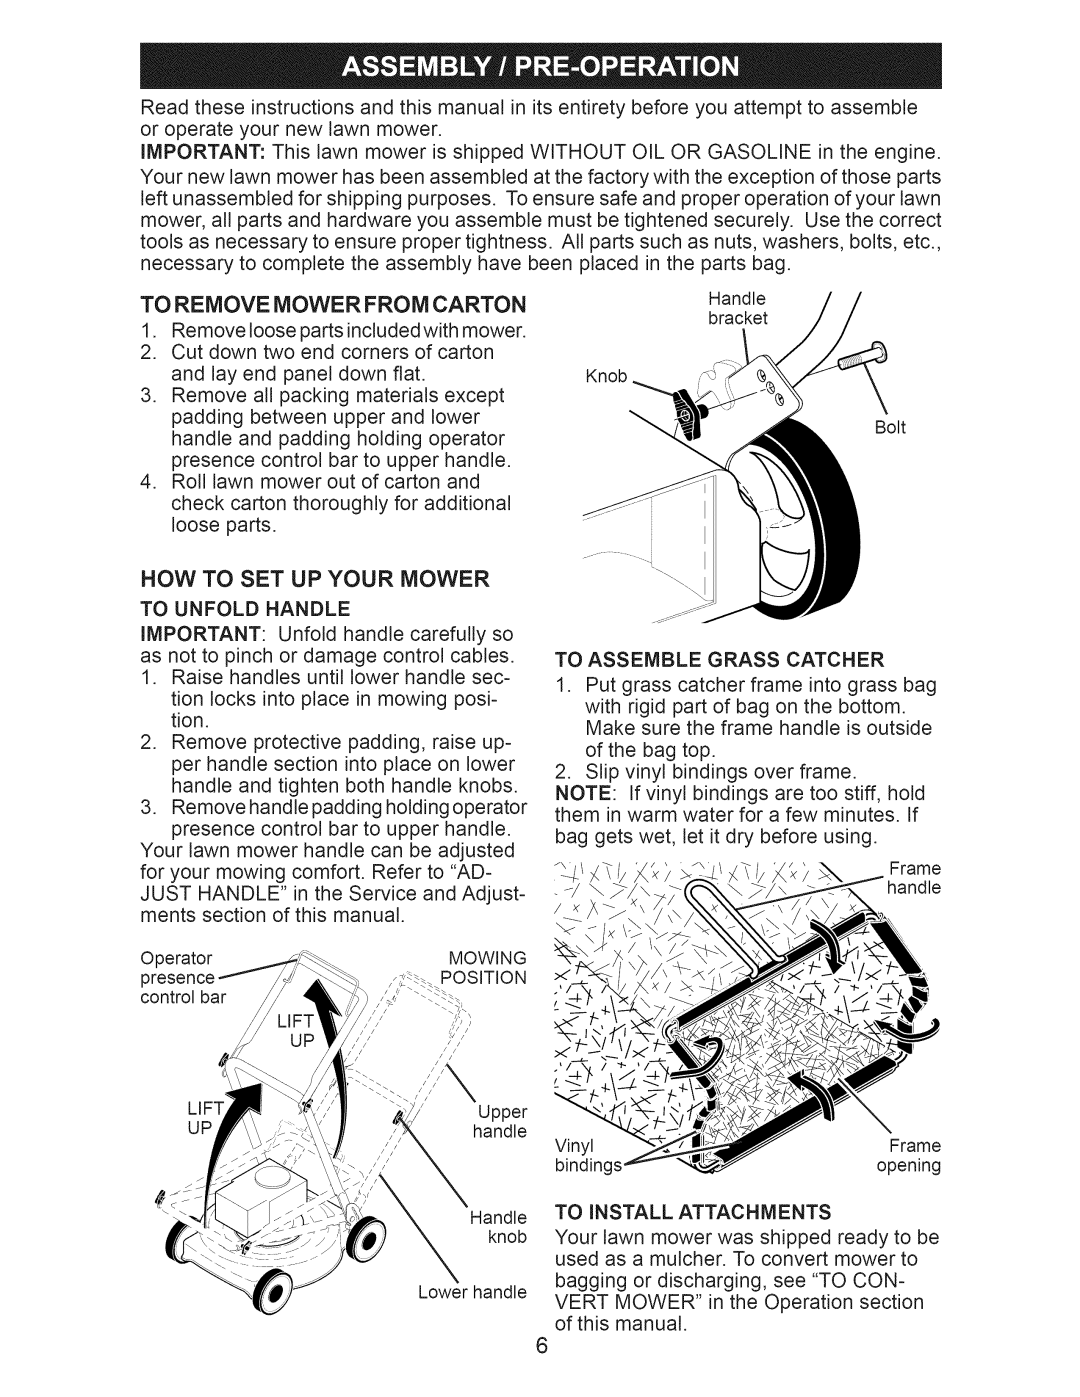 Craftsman 917.374093 owner manual To Remove Mower From Carton, Now To Set Up Your Mower 